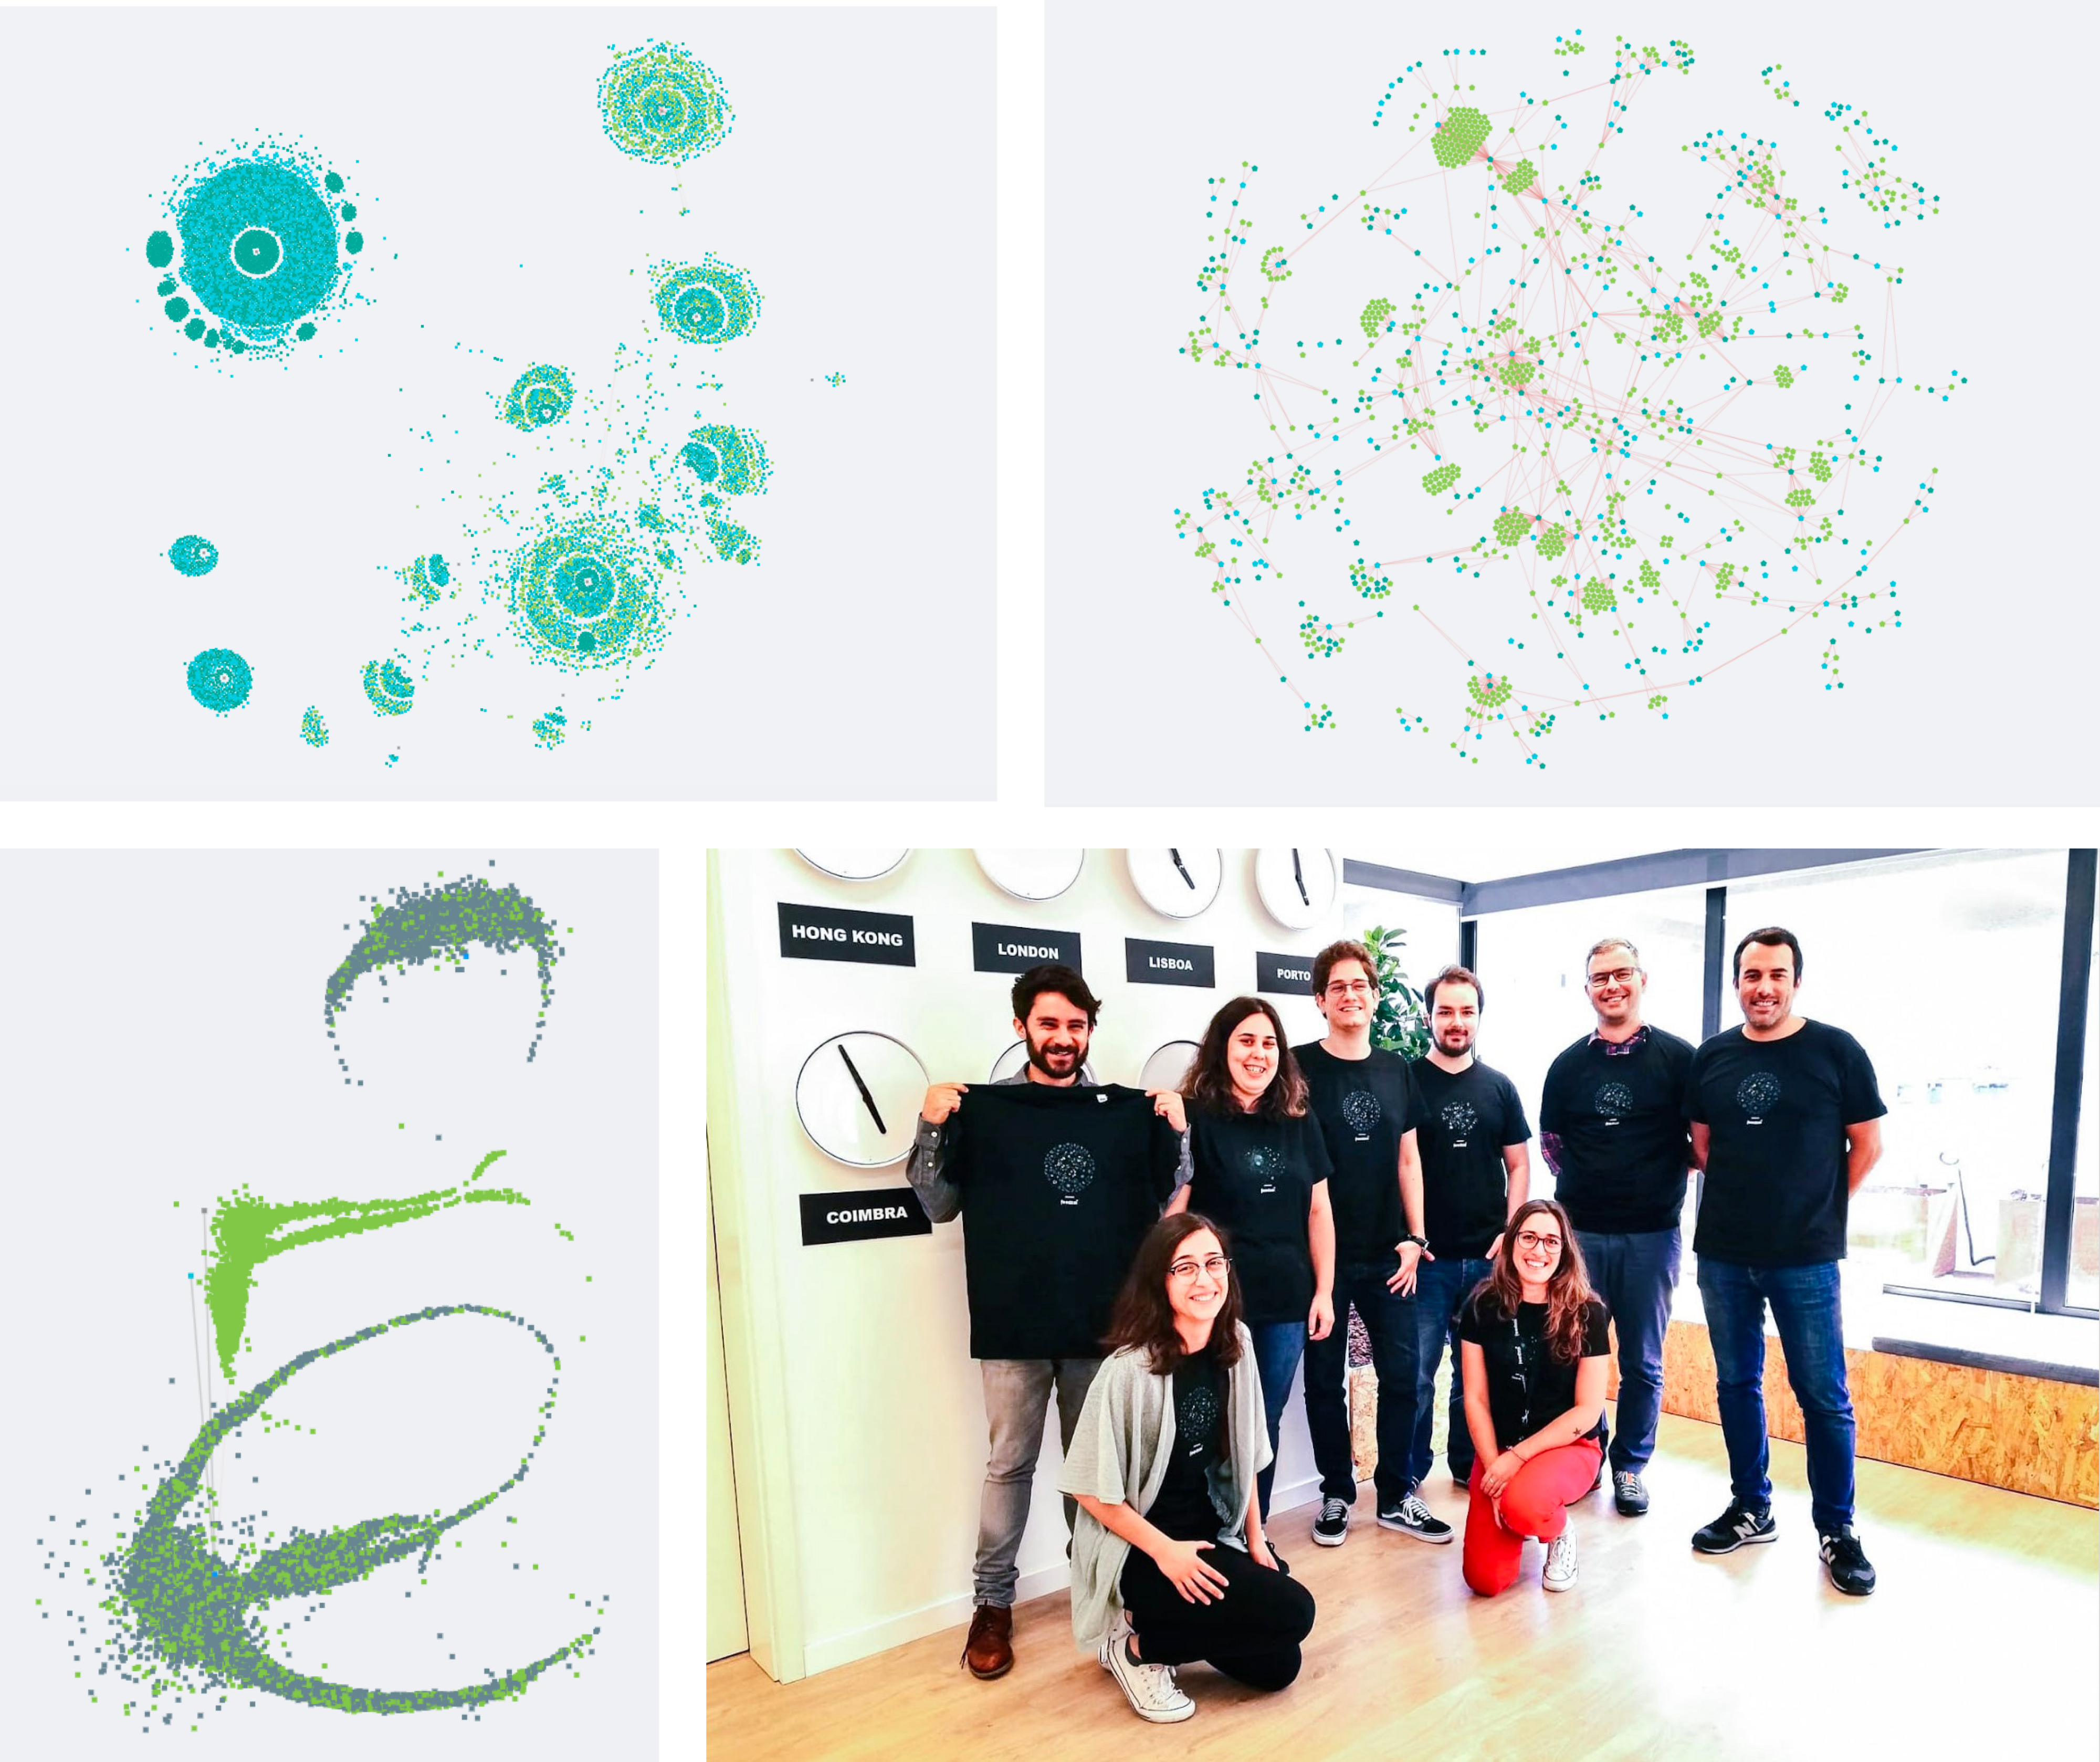 3 pictures of Genome data art, and a picture of people wearing matching shirts